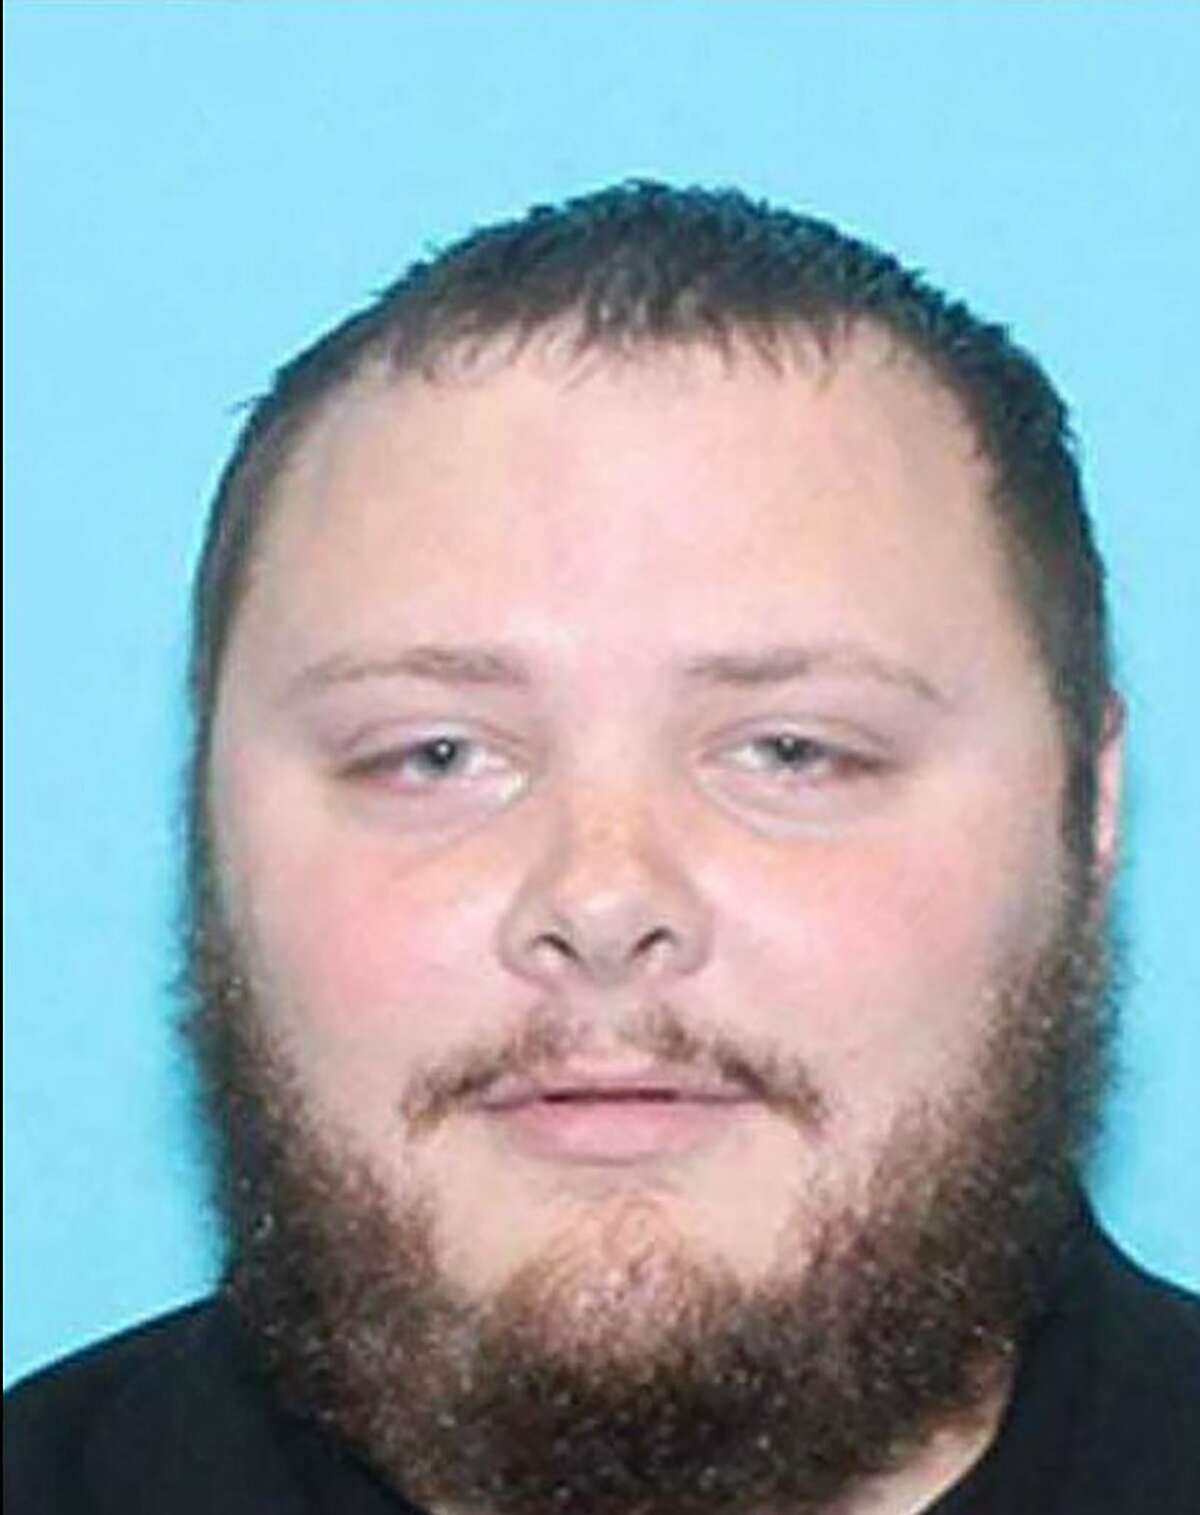 This undated photo provided by the Texas Department of Public Safety shows Devin Kelley, the suspect in the shooting at the First Baptist Church in Sutherland Springs, Texas, on Sunday, Nov. 5, 2017. A short time after the shooting, Kelley was found dead in his vehicle. (Texas Department of Public Safety via AP)